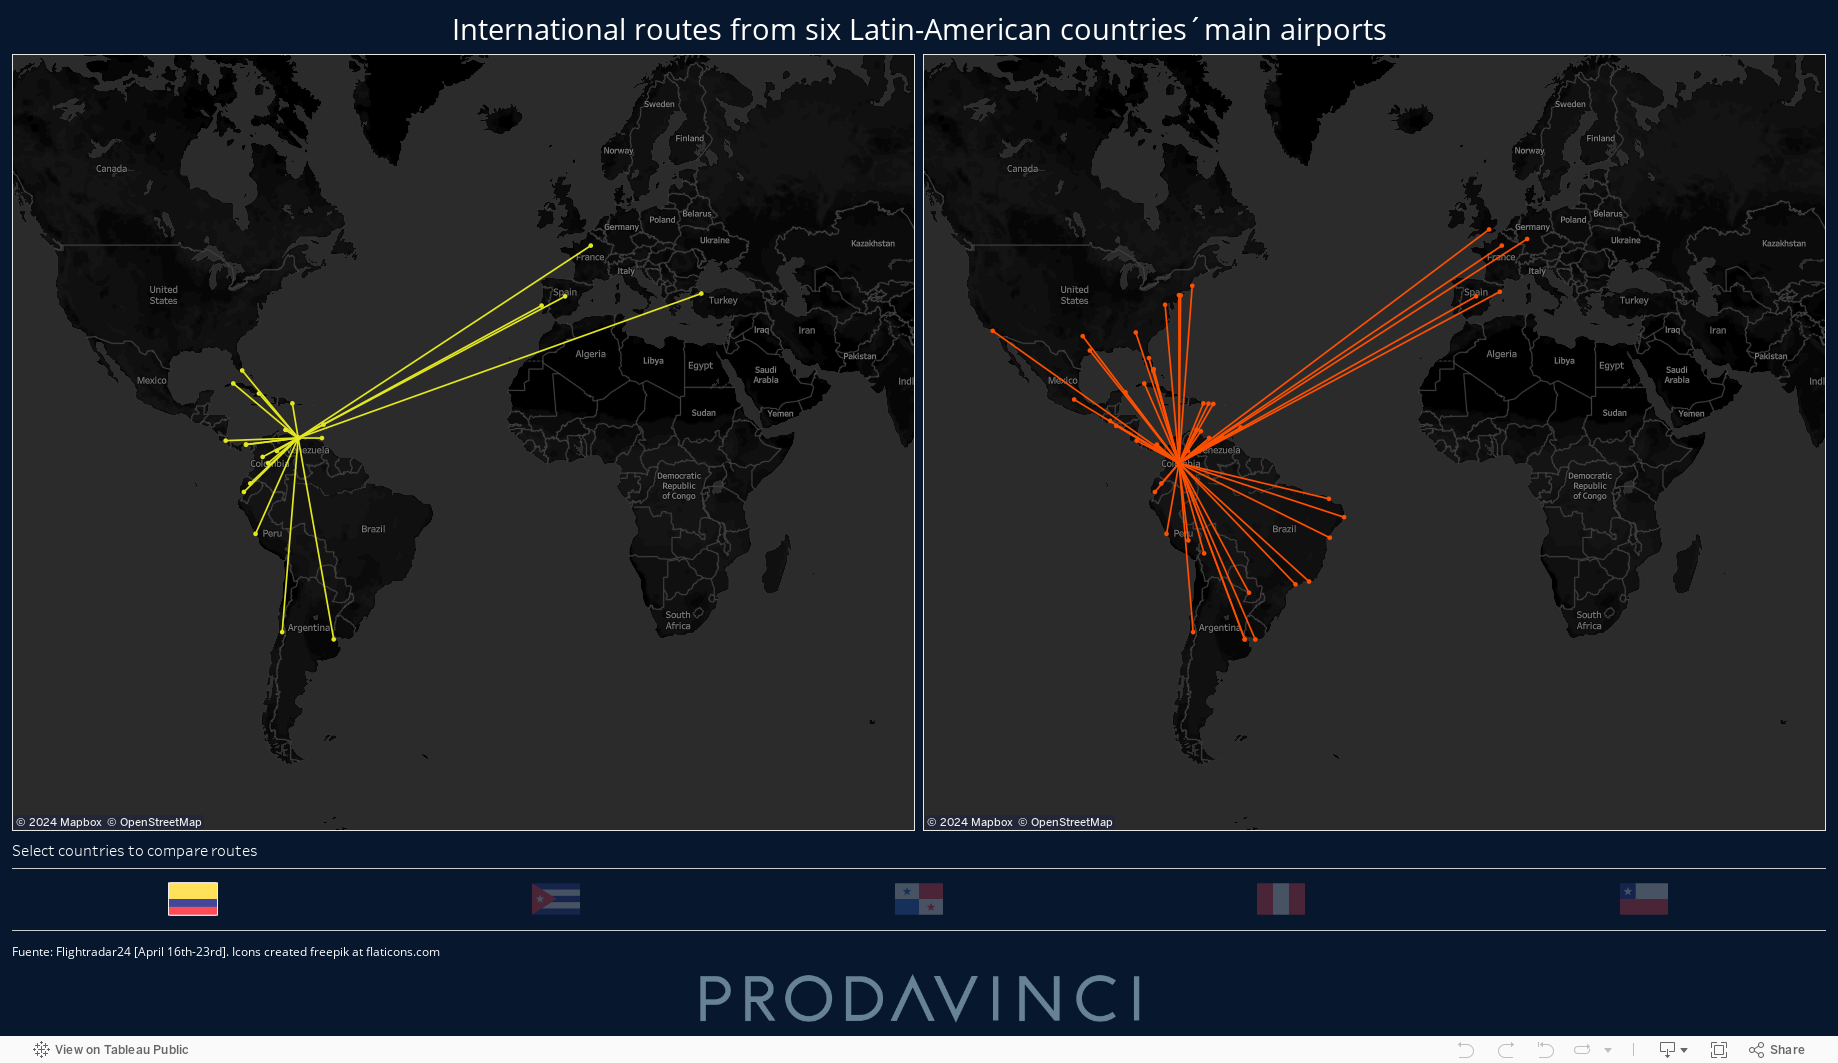 International routes from main airports at 6 Latin American countries 